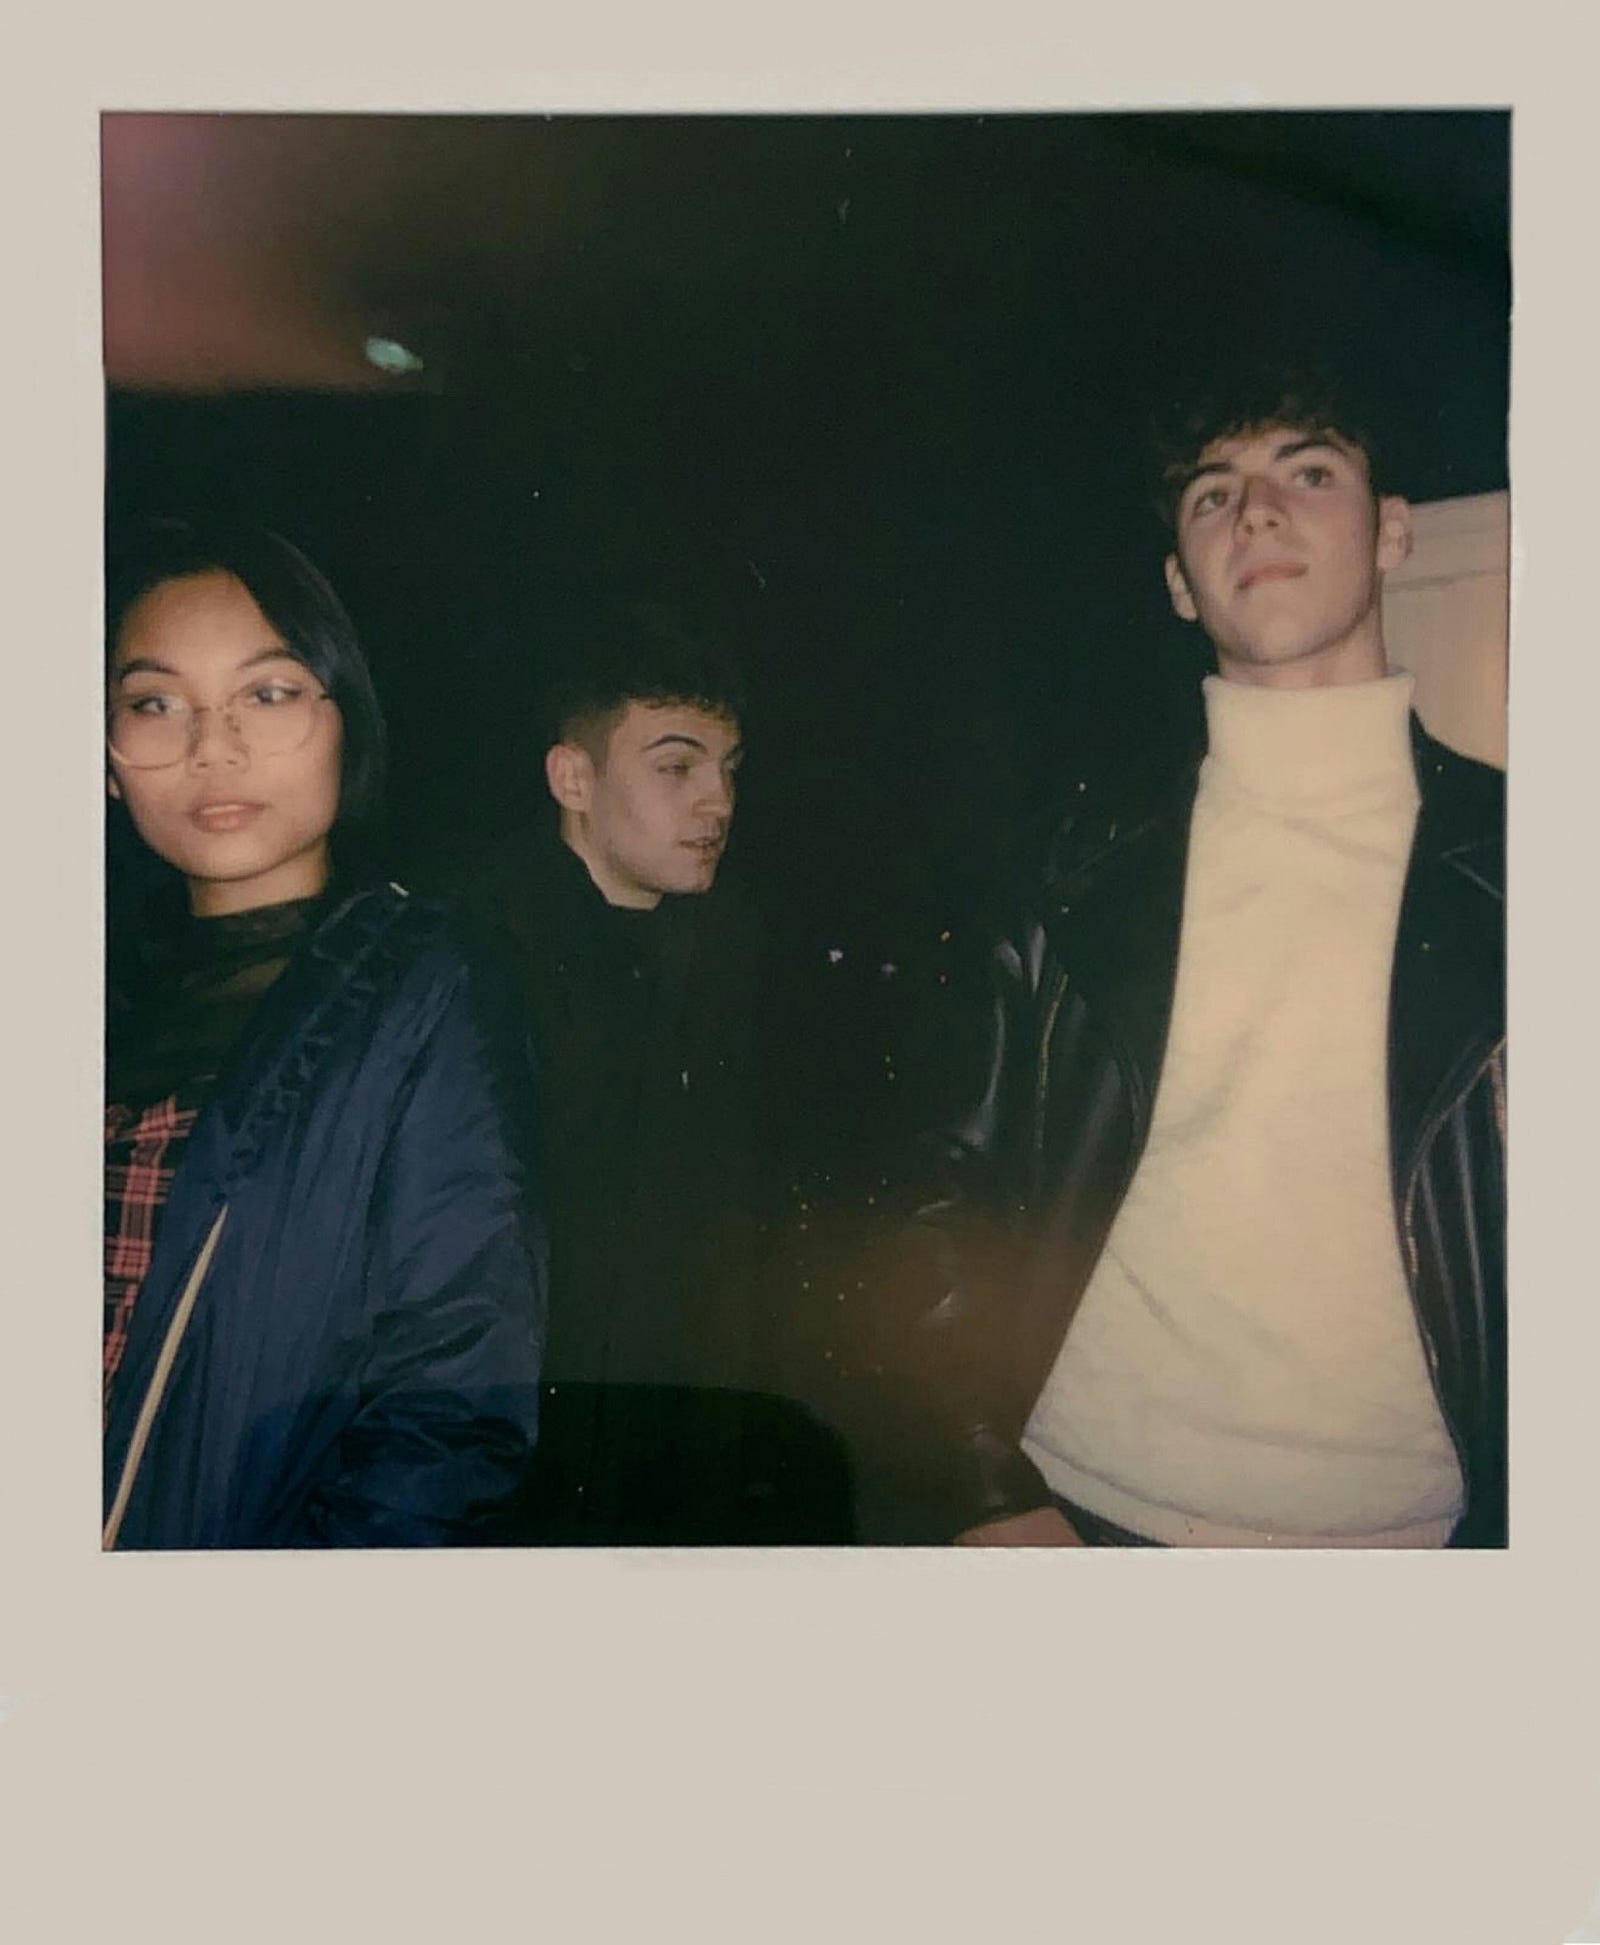 Three young people in a Polaroid picture. Colorectal cancer is rising in incidence among those under age 55.